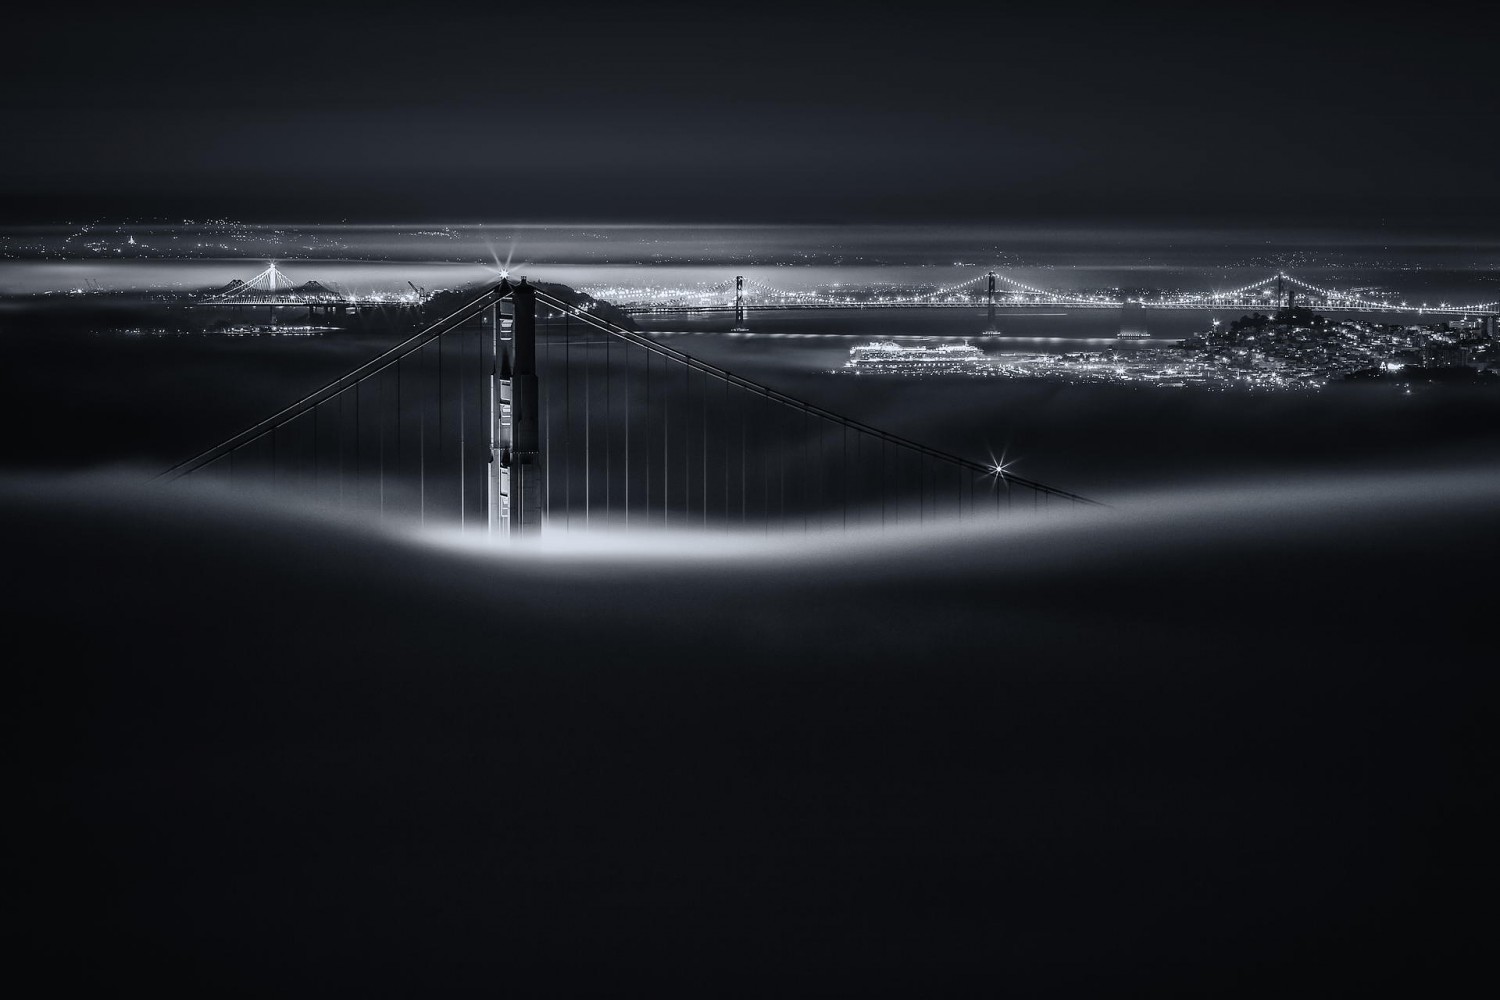 Dark and Gripping Time-Lapse Captures San Francisco Like You've Never Seen it Before